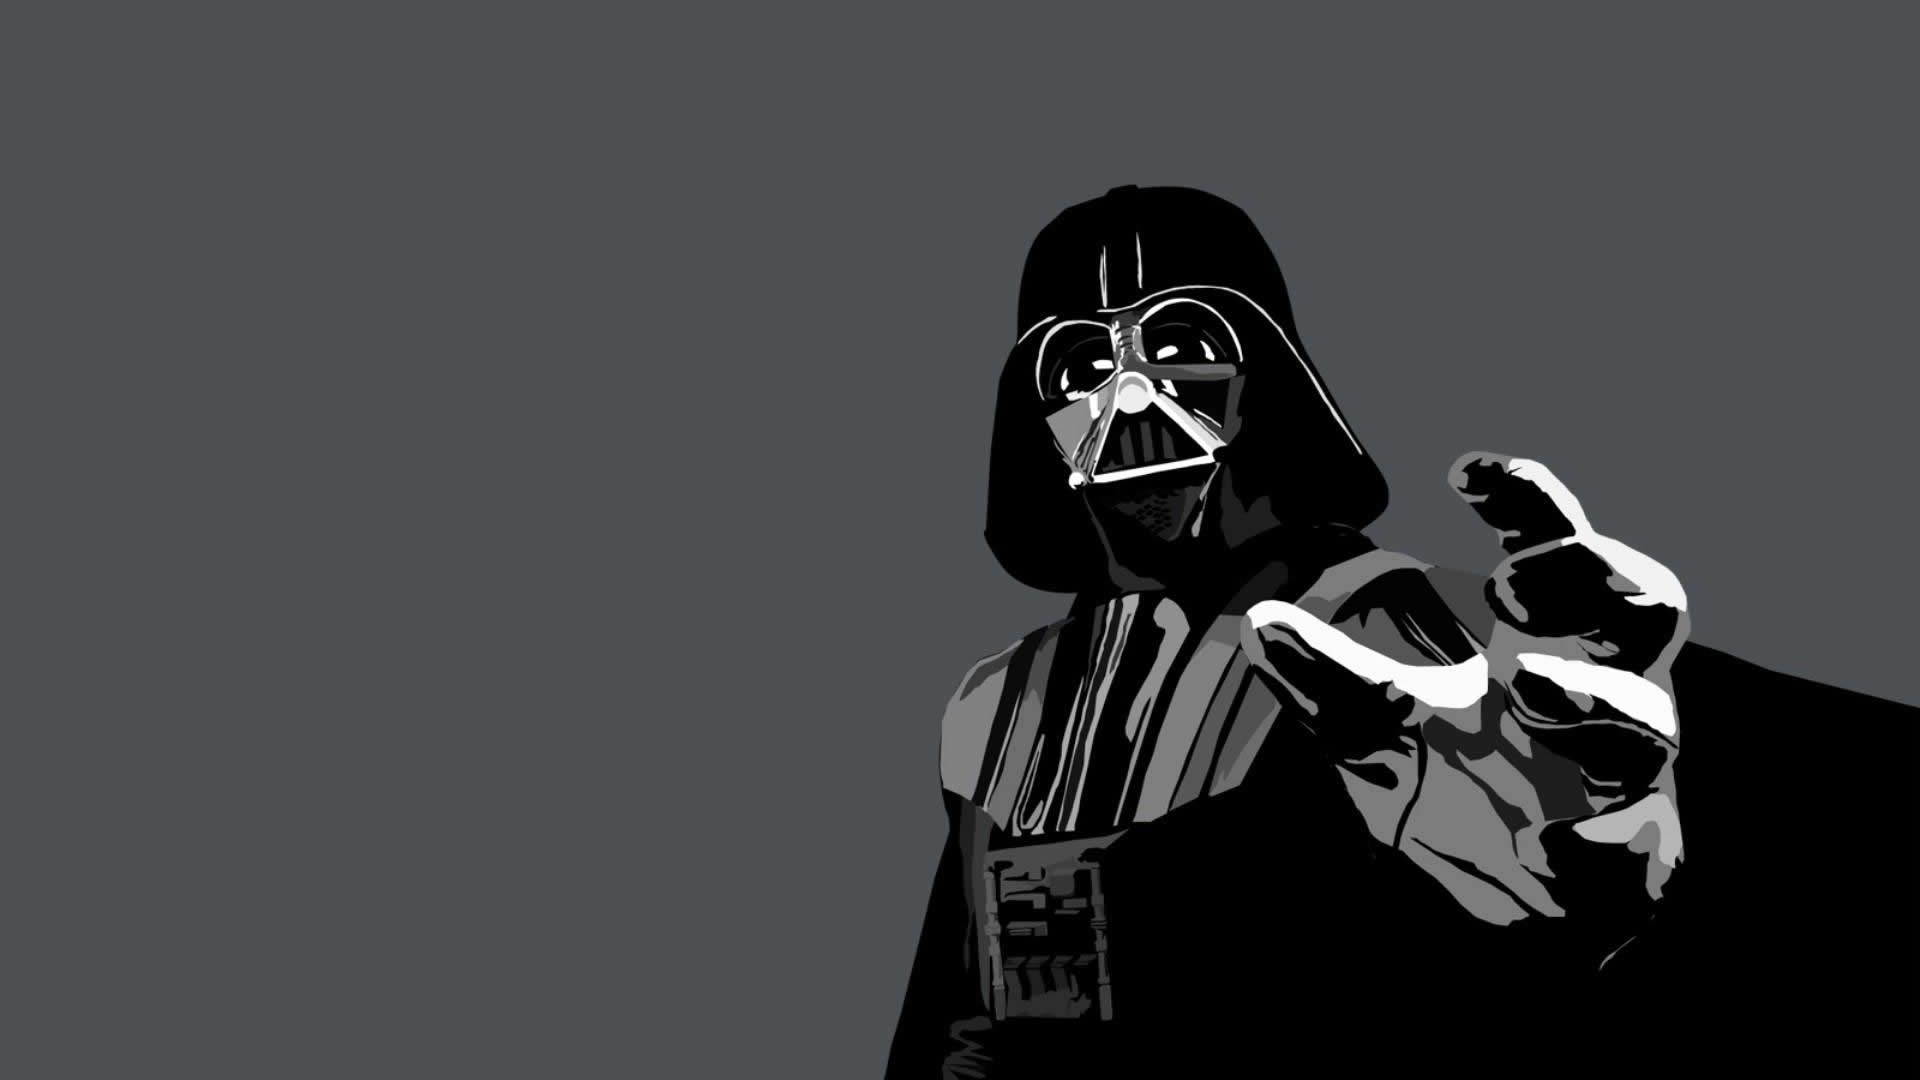 Best Star Wars Wallpaper: 30 Image To Help You Pick A Side